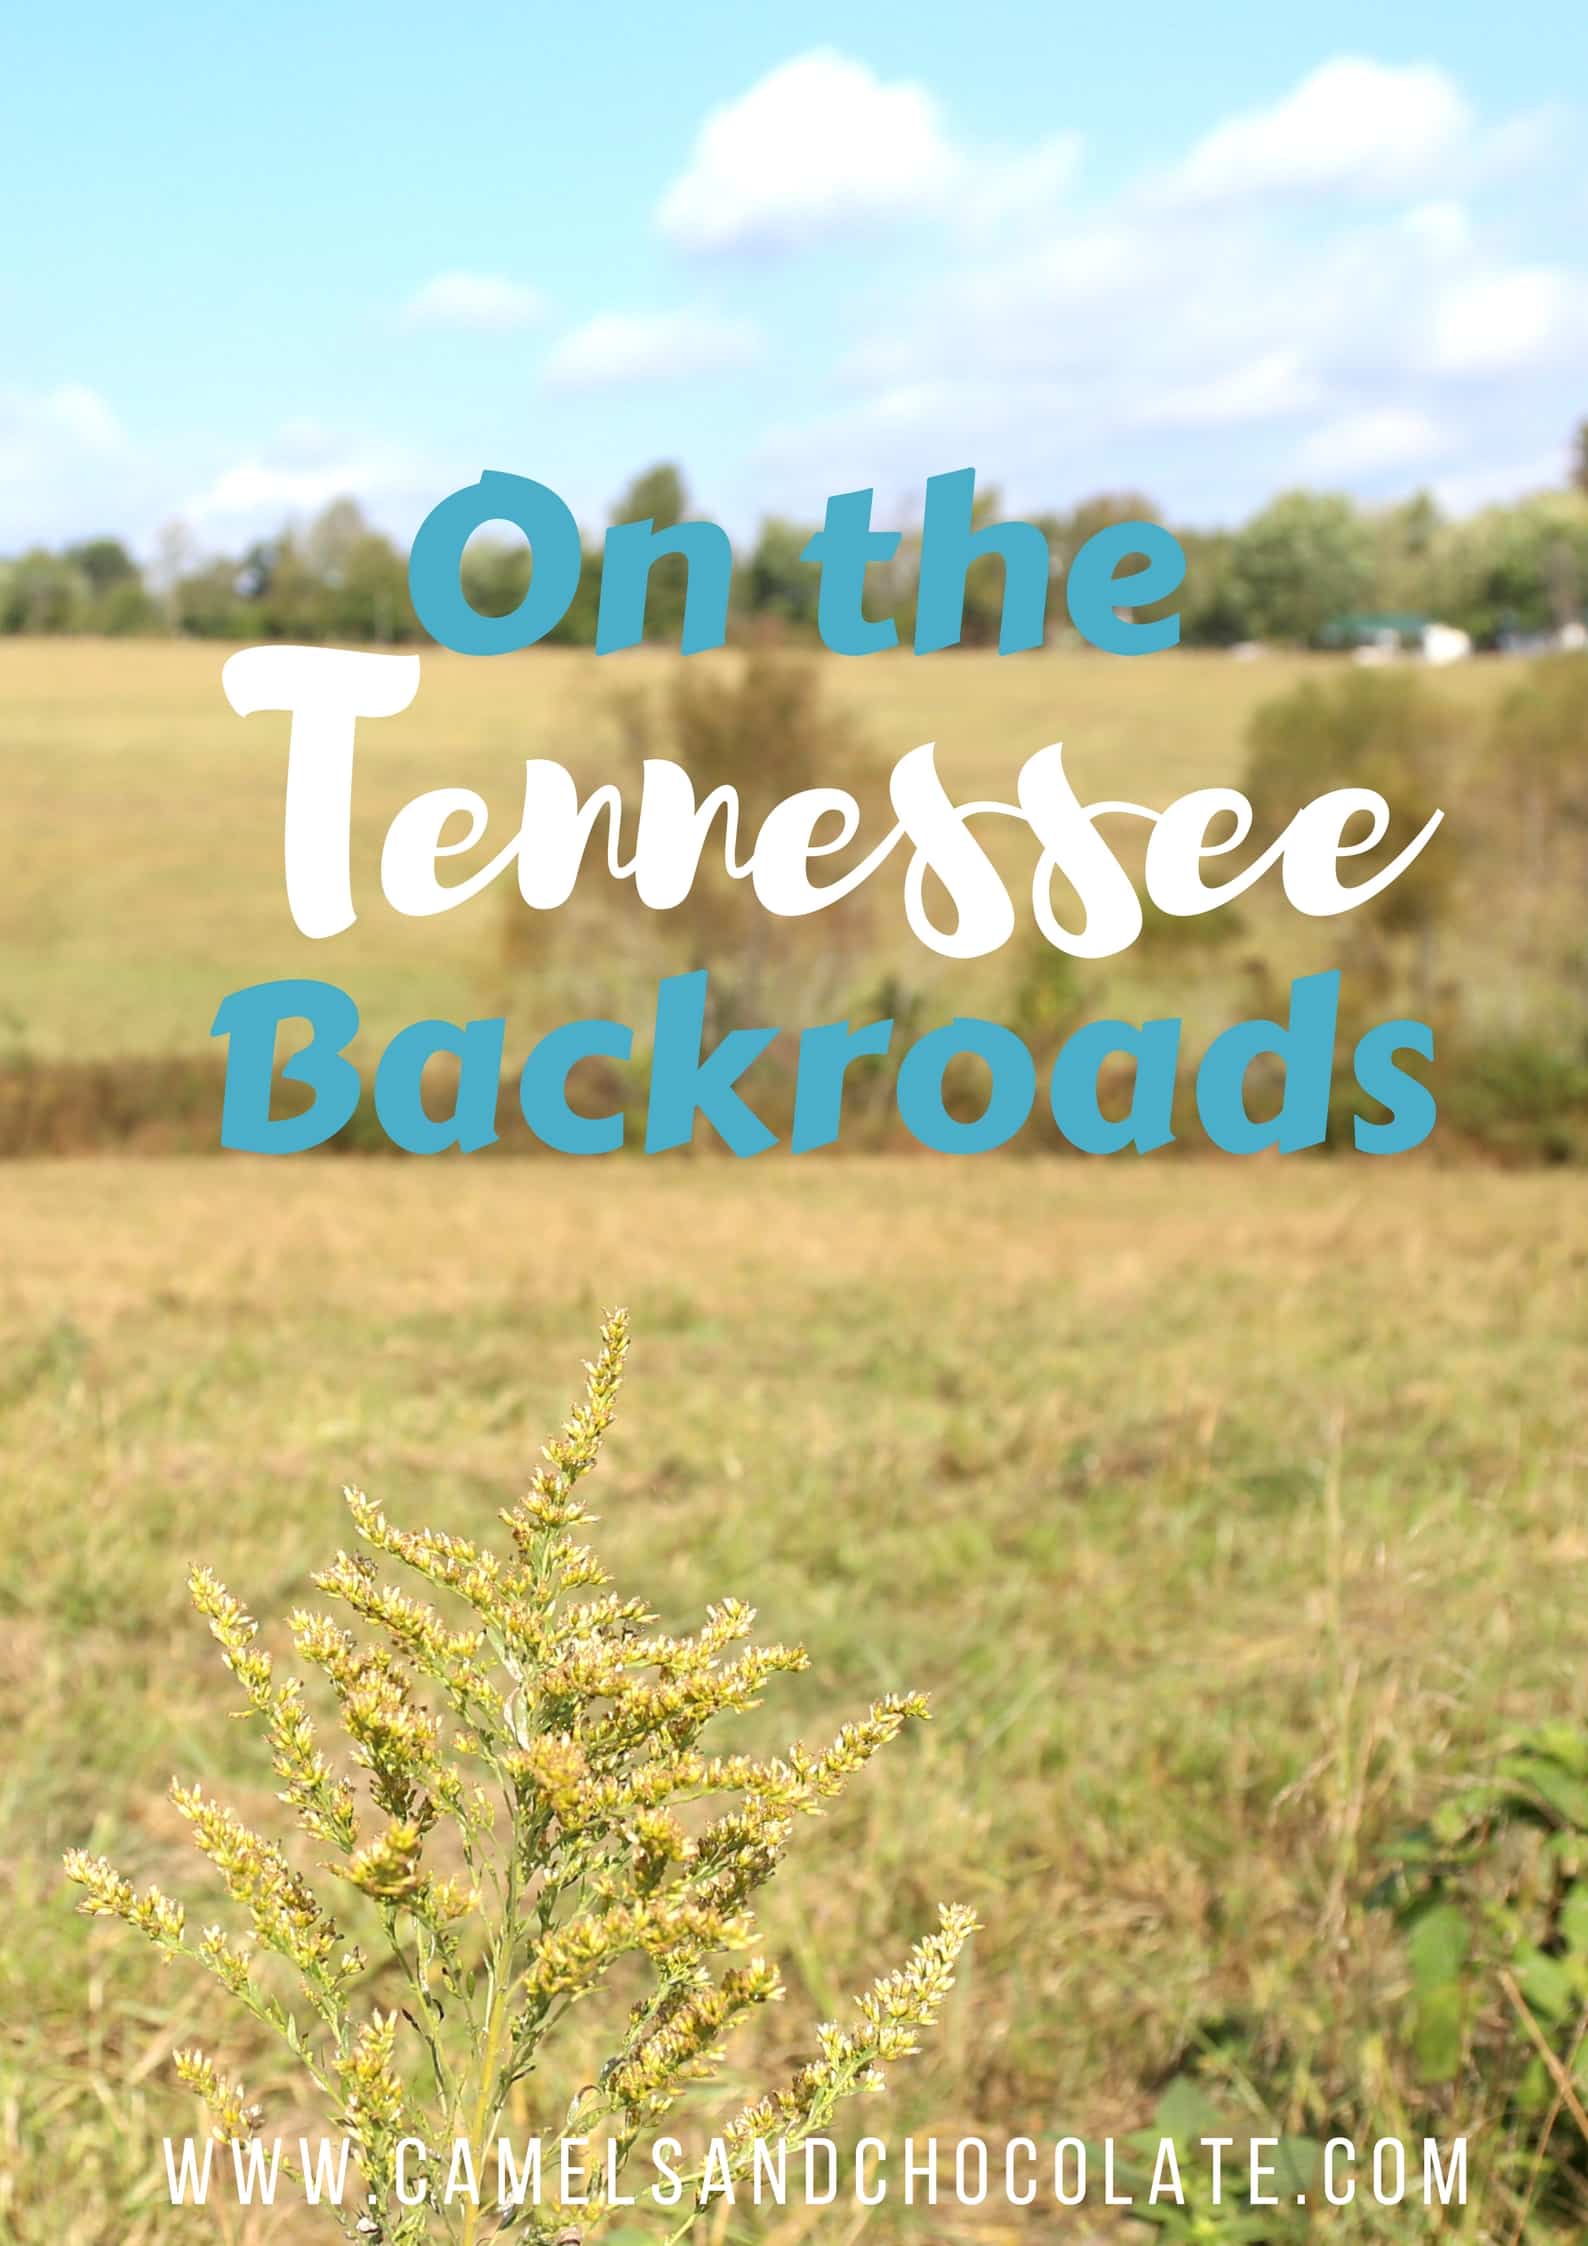 Tennessee Whiskey Trail: Middle Tennessee Backroads